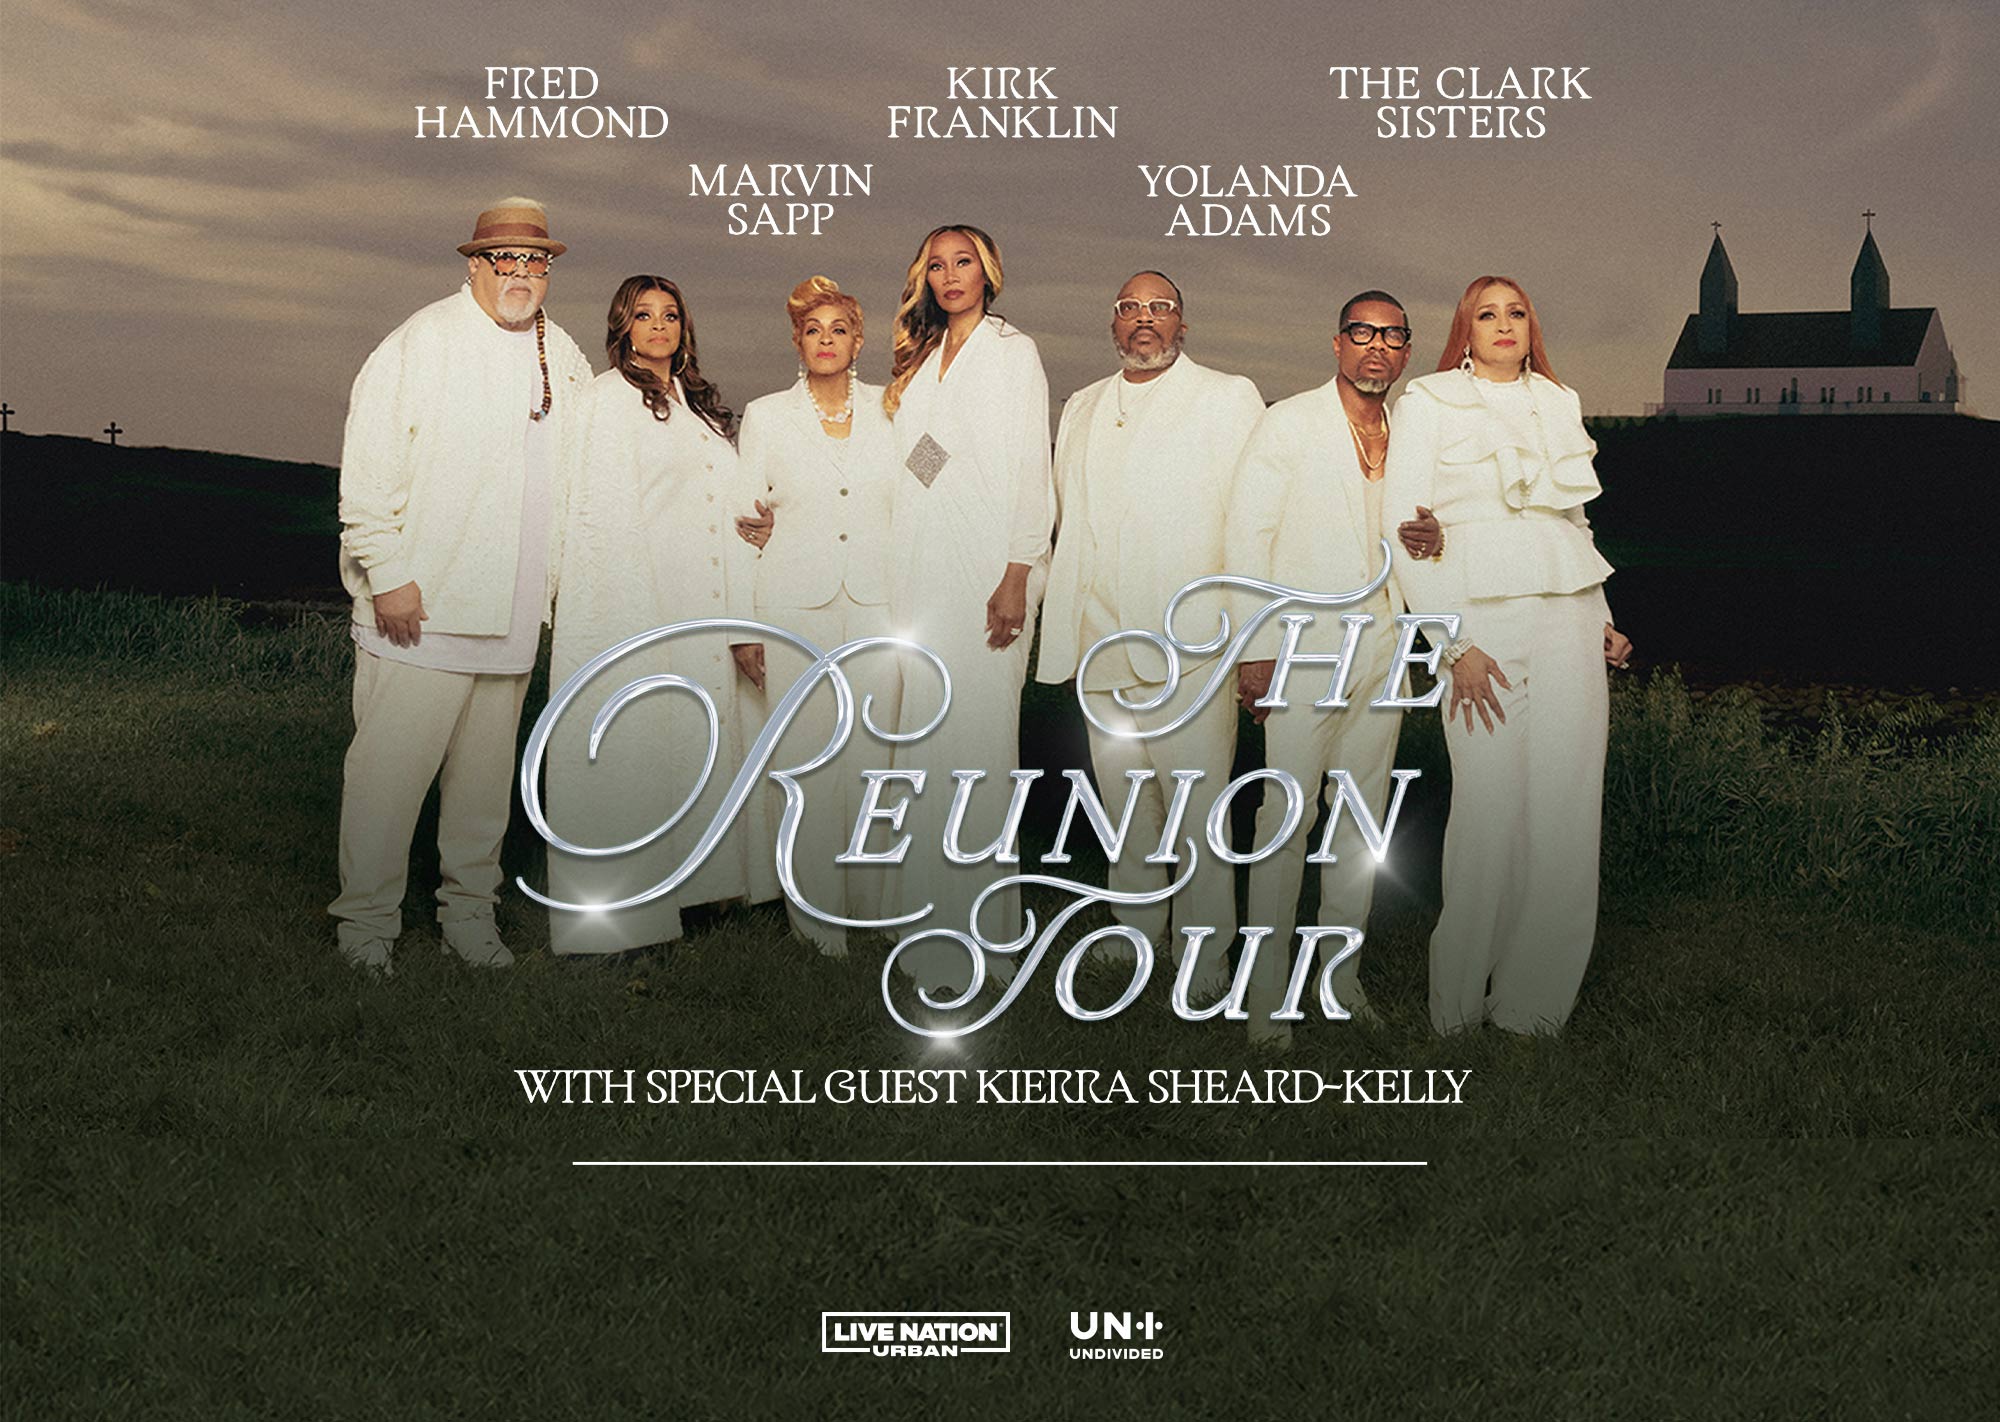 Kirk Franklin's The Reunion Tour comes to H-E-B Center on Oct 17